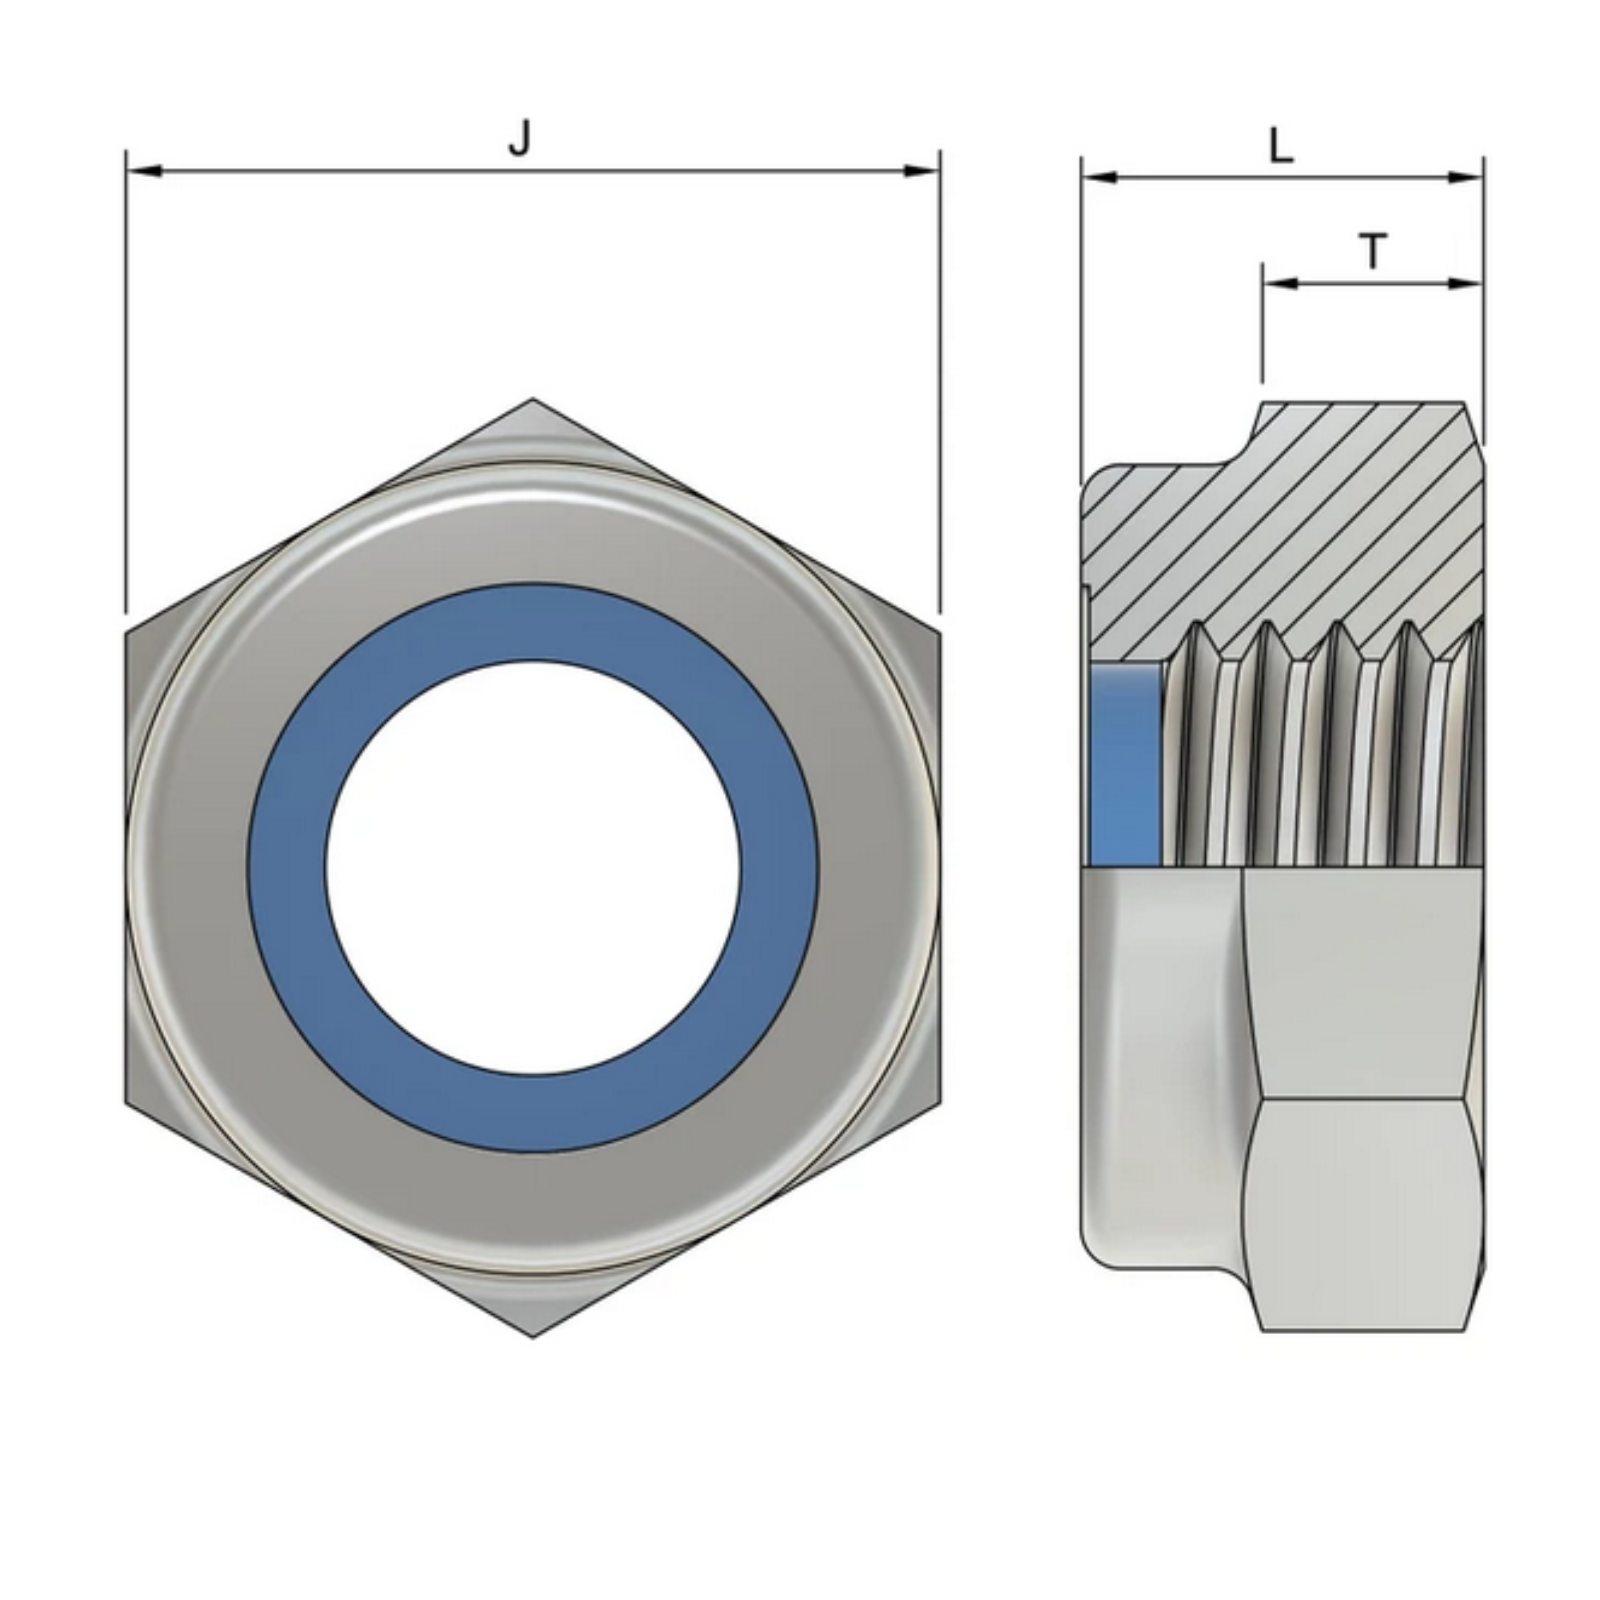 M4 Hexagon Nylon Locking Nuts (DIN 985) - Stainless Steel (A2)